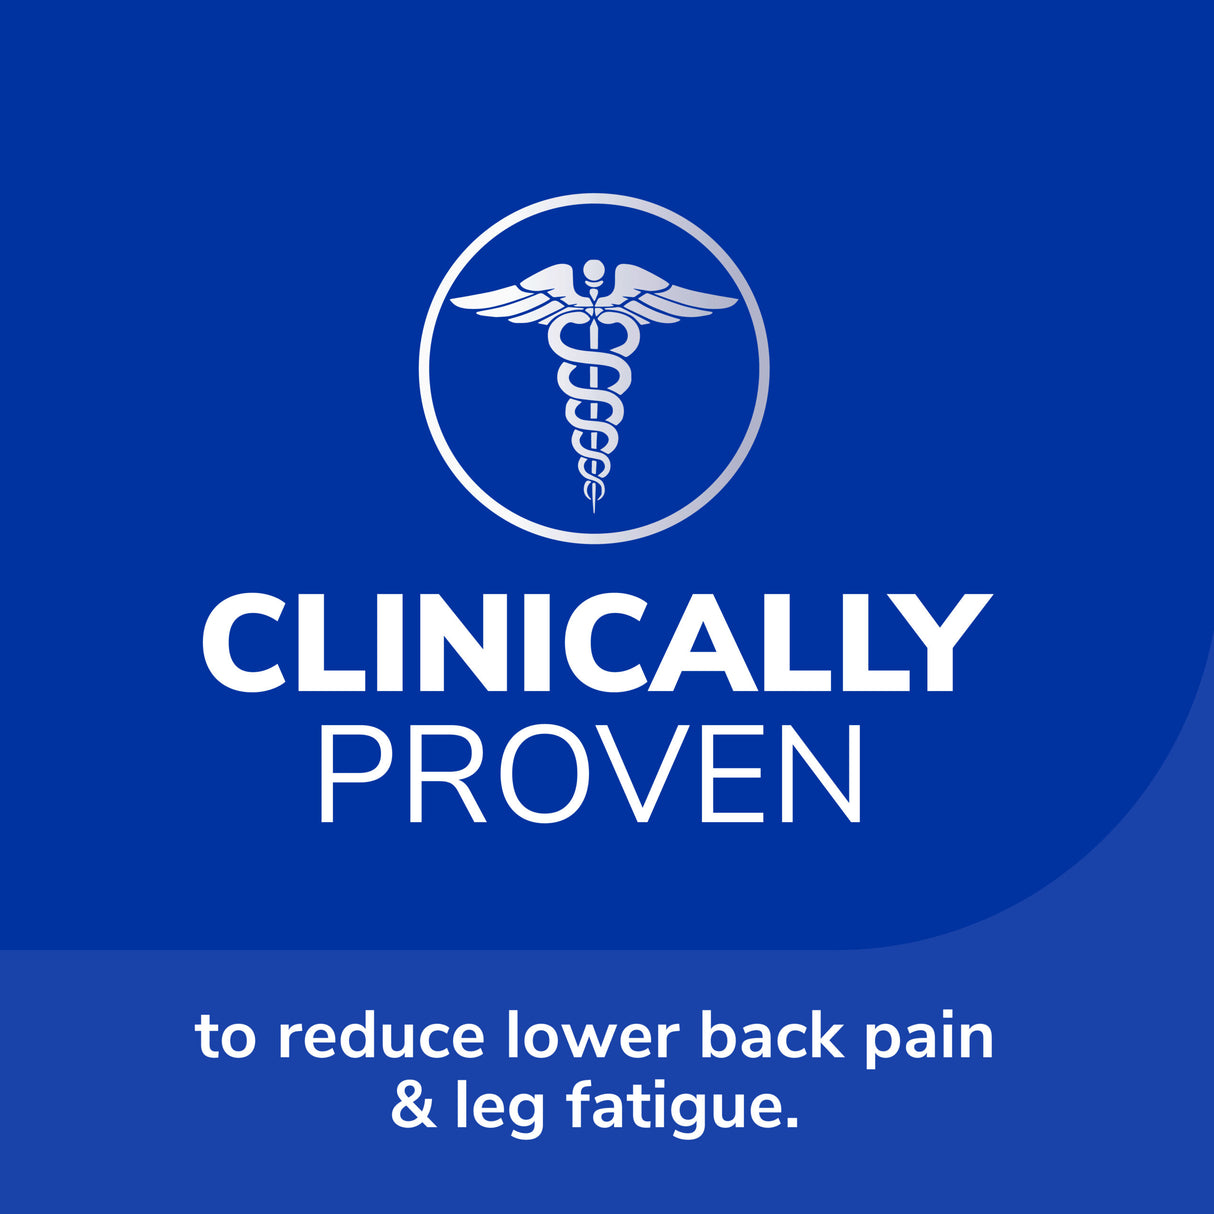 image of clinically proven to reduce lower back pain and leg fatigue